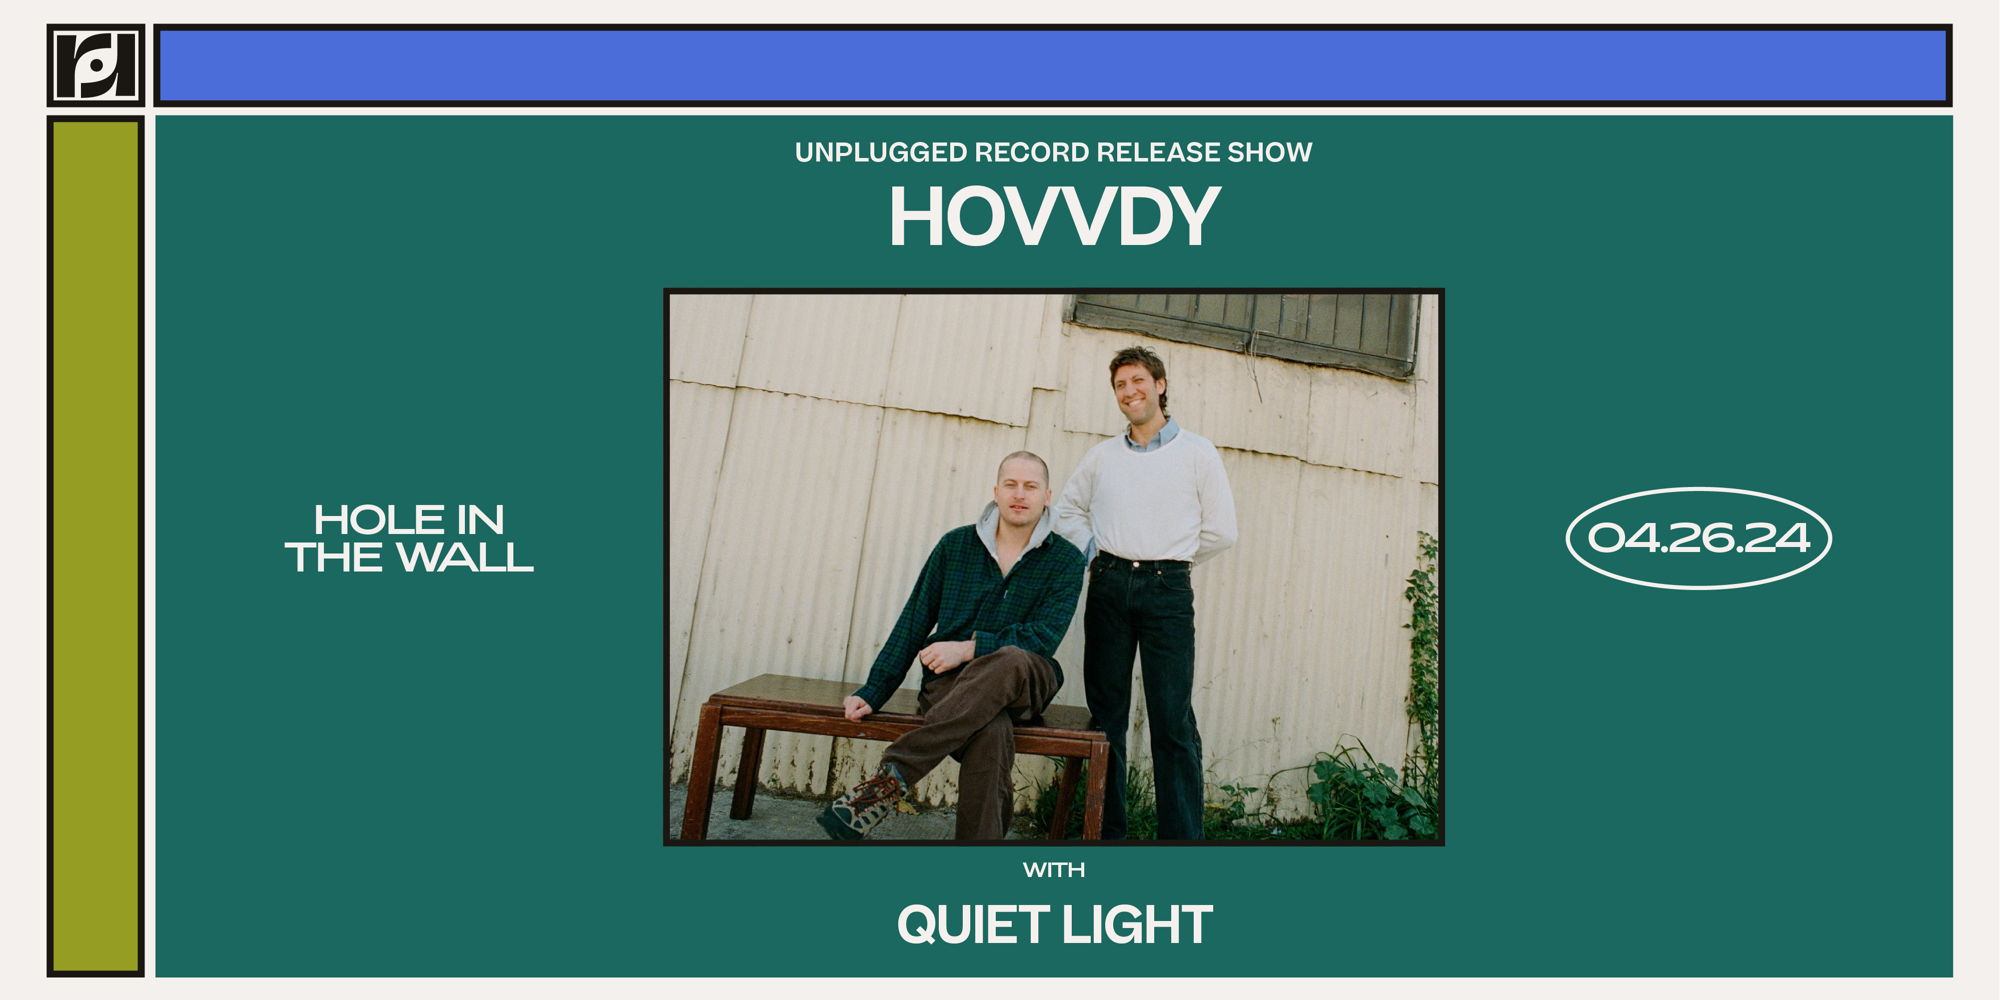 Resound Presents: Hovvdy w/ Quiet Light at Hole in the Wall on 4/26 promotional image